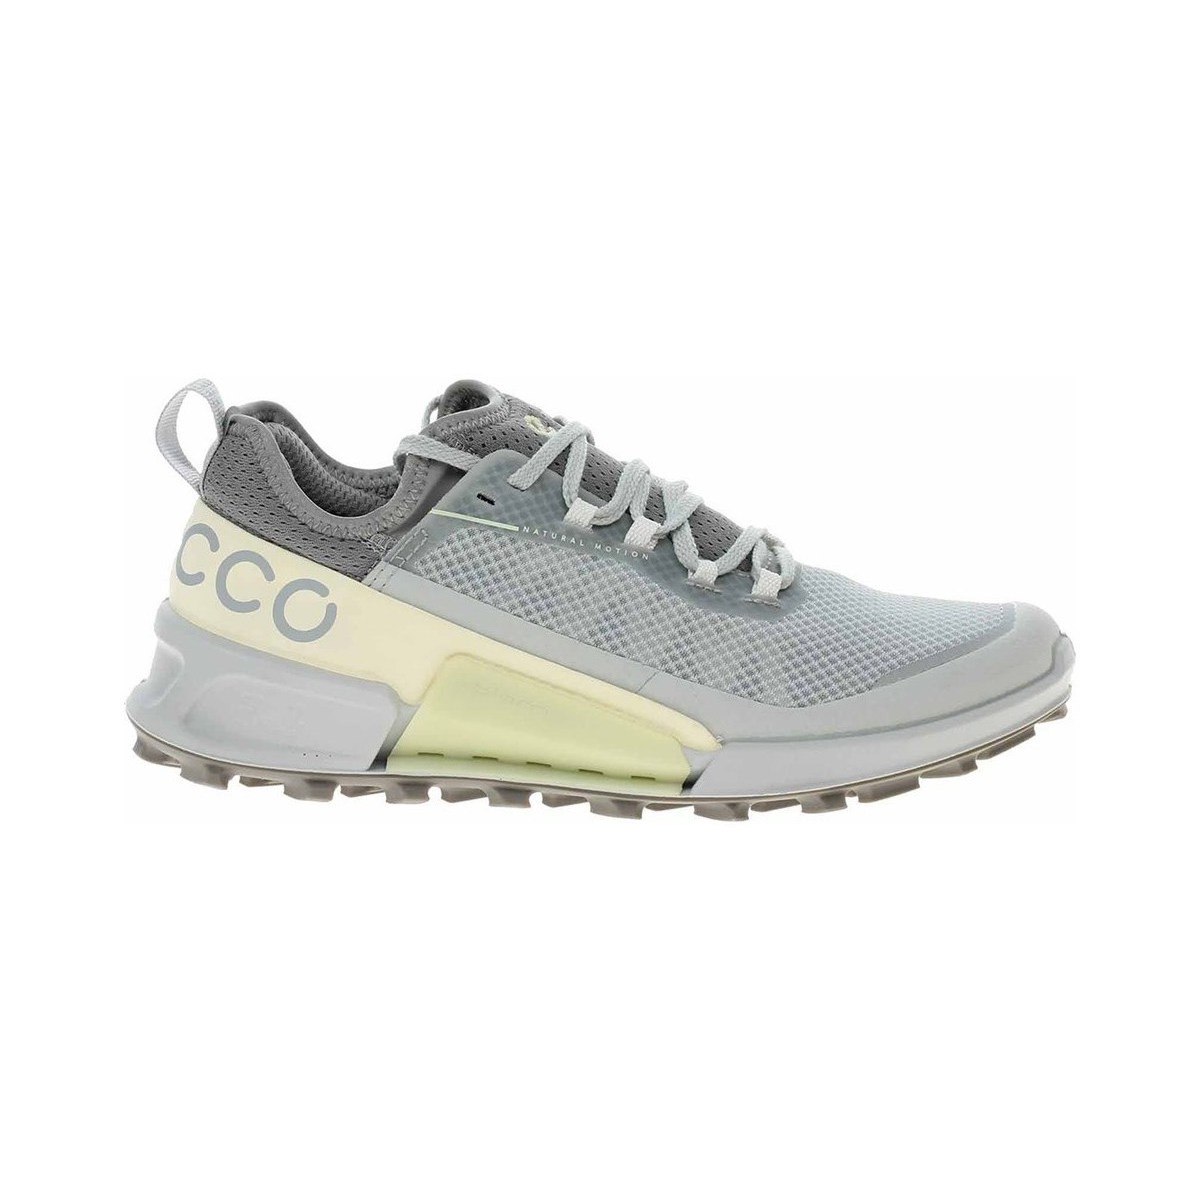 Chaussures Femme Baskets basses Ecco Biom 21 X Country Gris